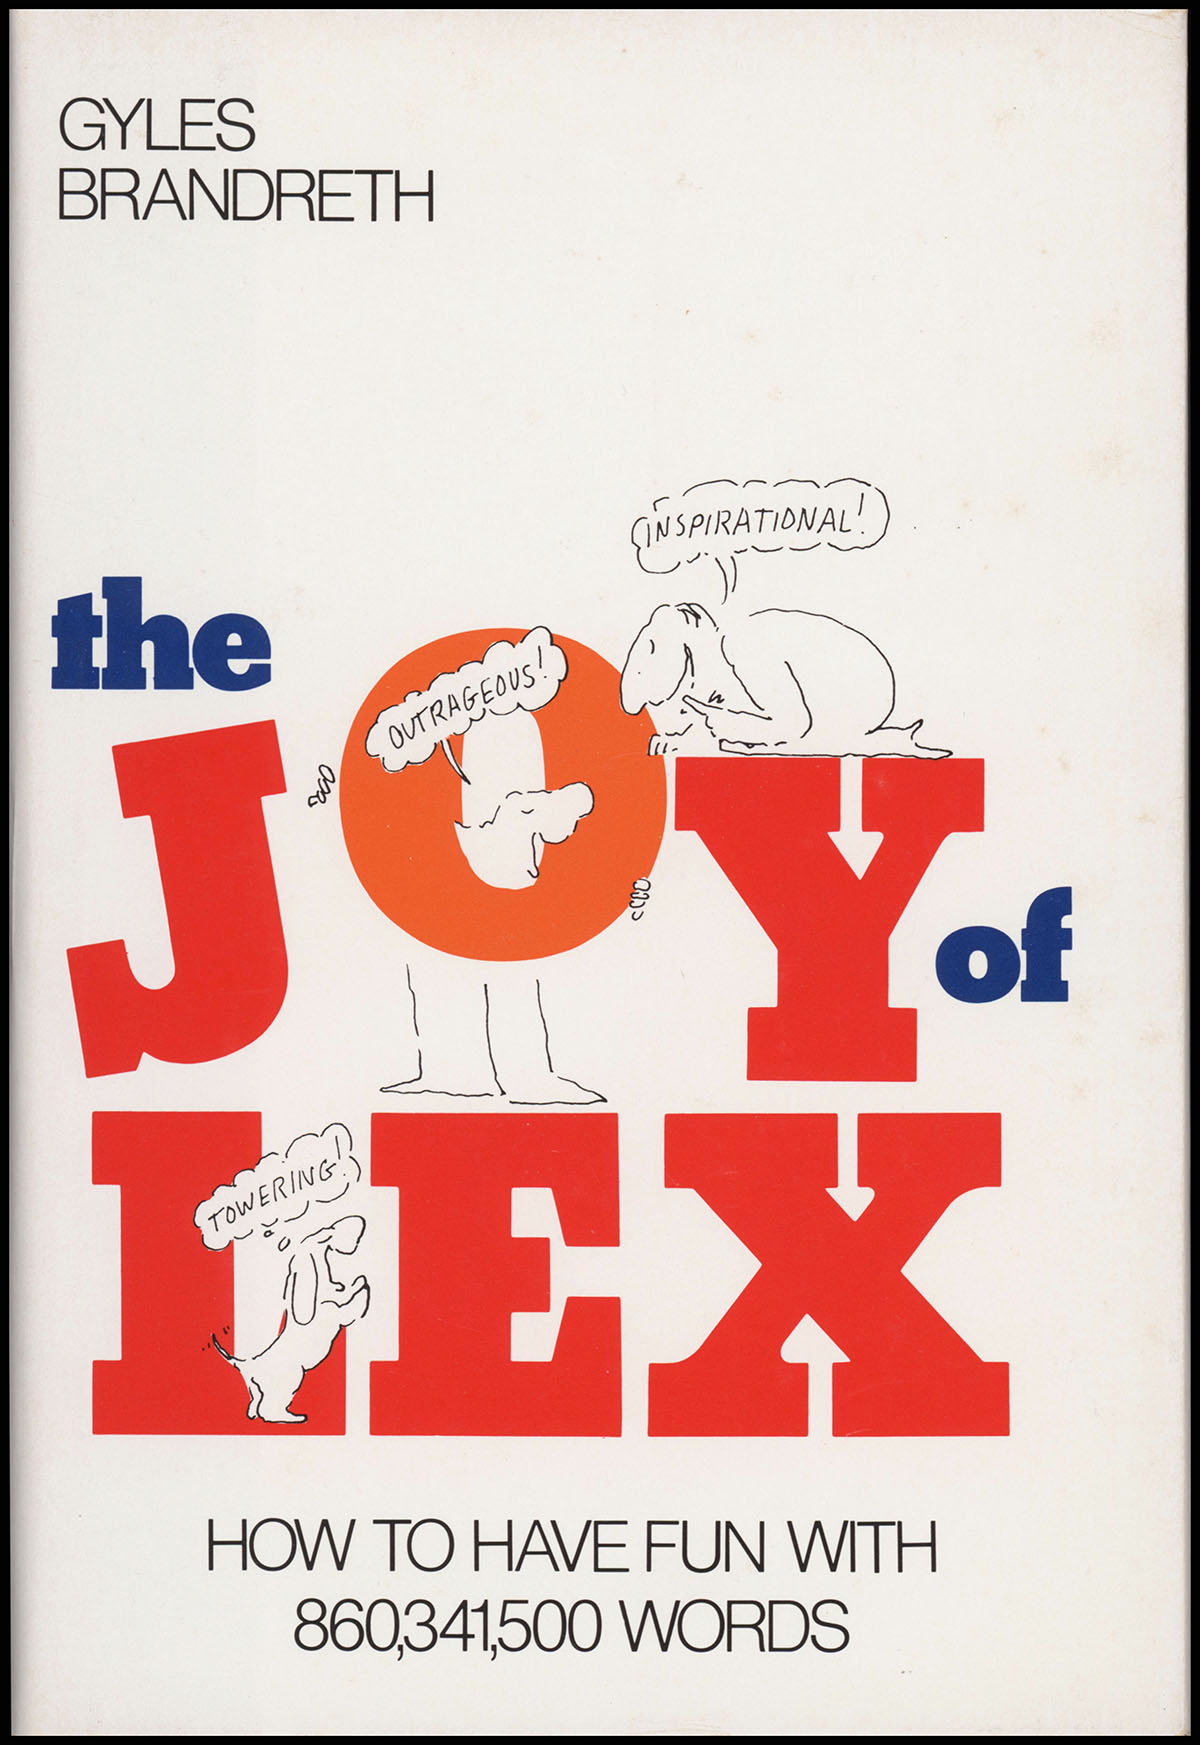 Brandreth, Gyles - The Joy of Lex: How to Have Fun with 860,341,500 Words